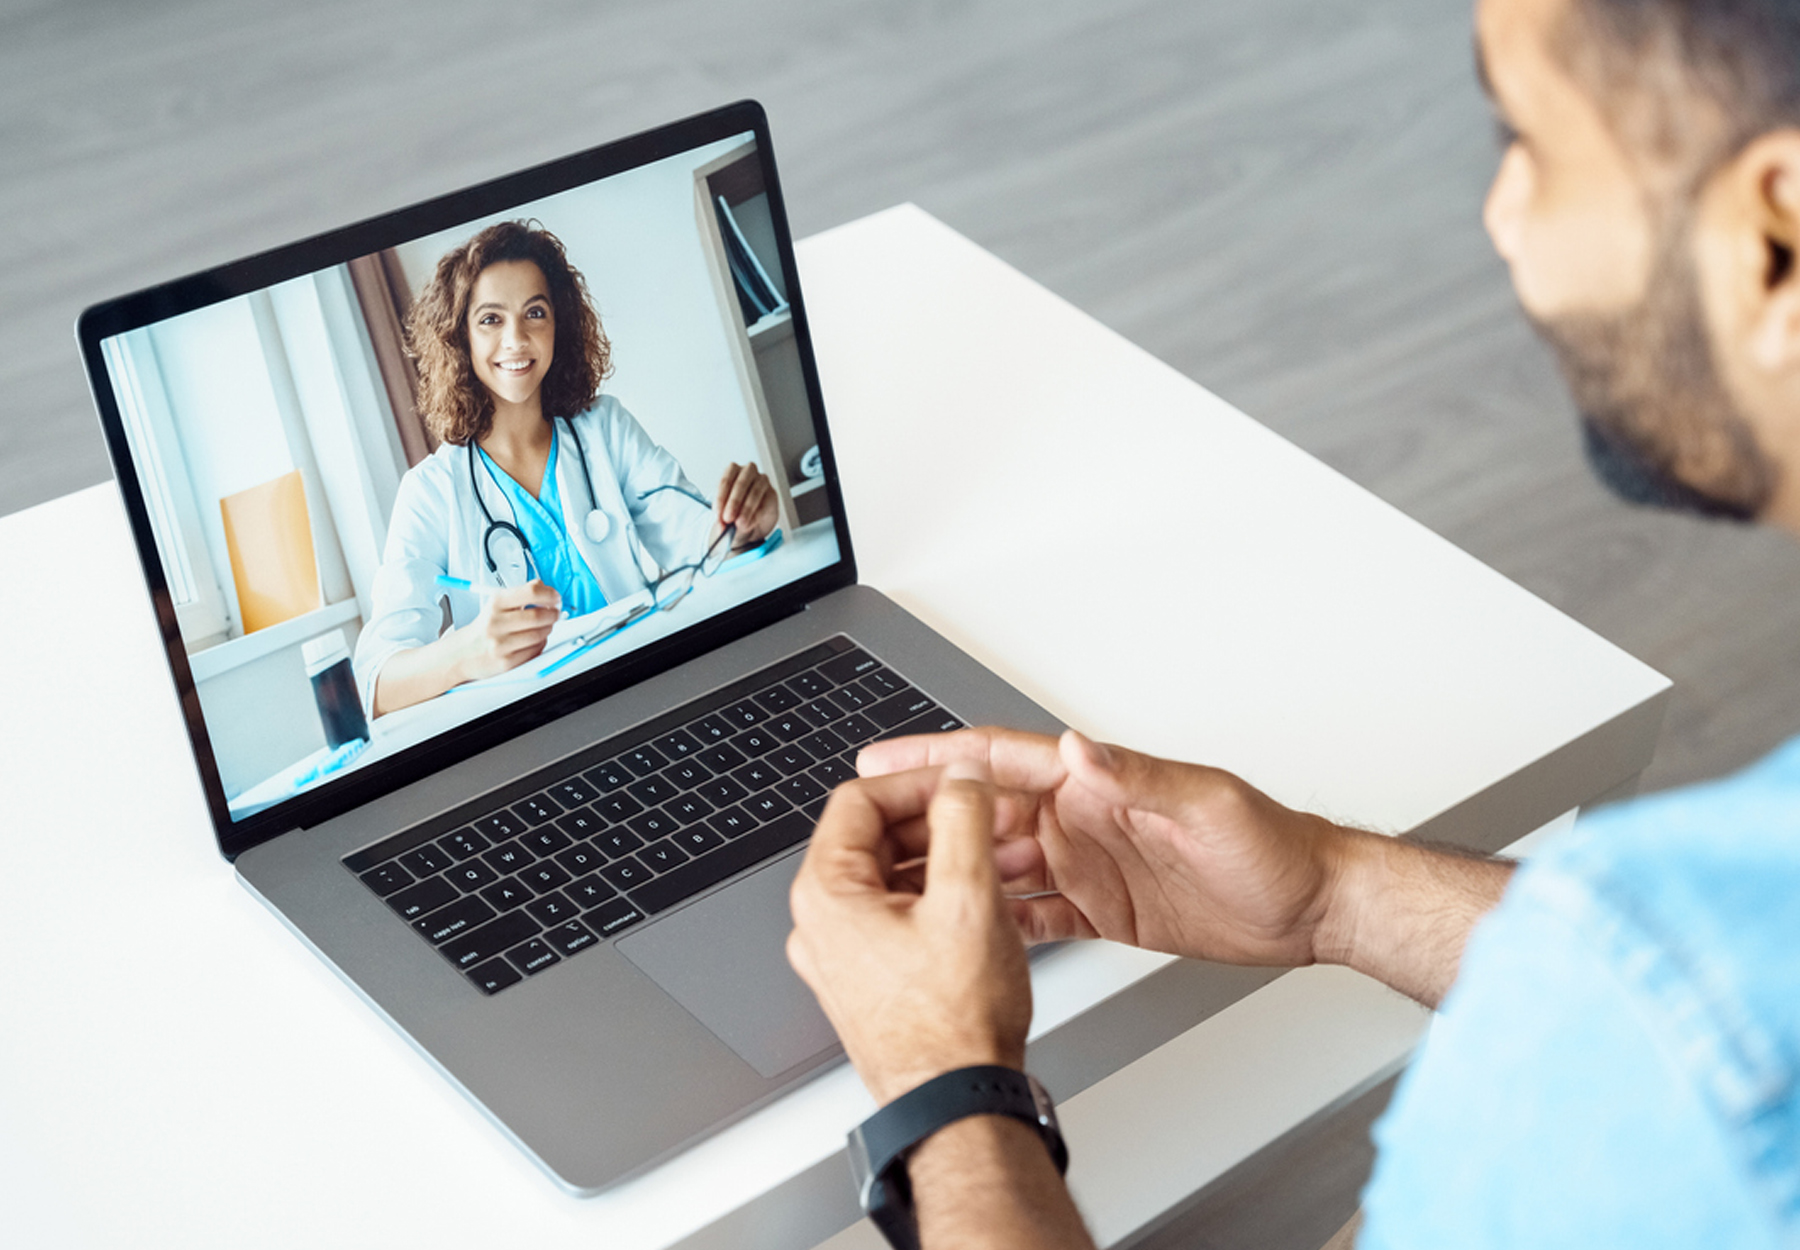 A man speaks to his doctor over a video conference call on his laptop.